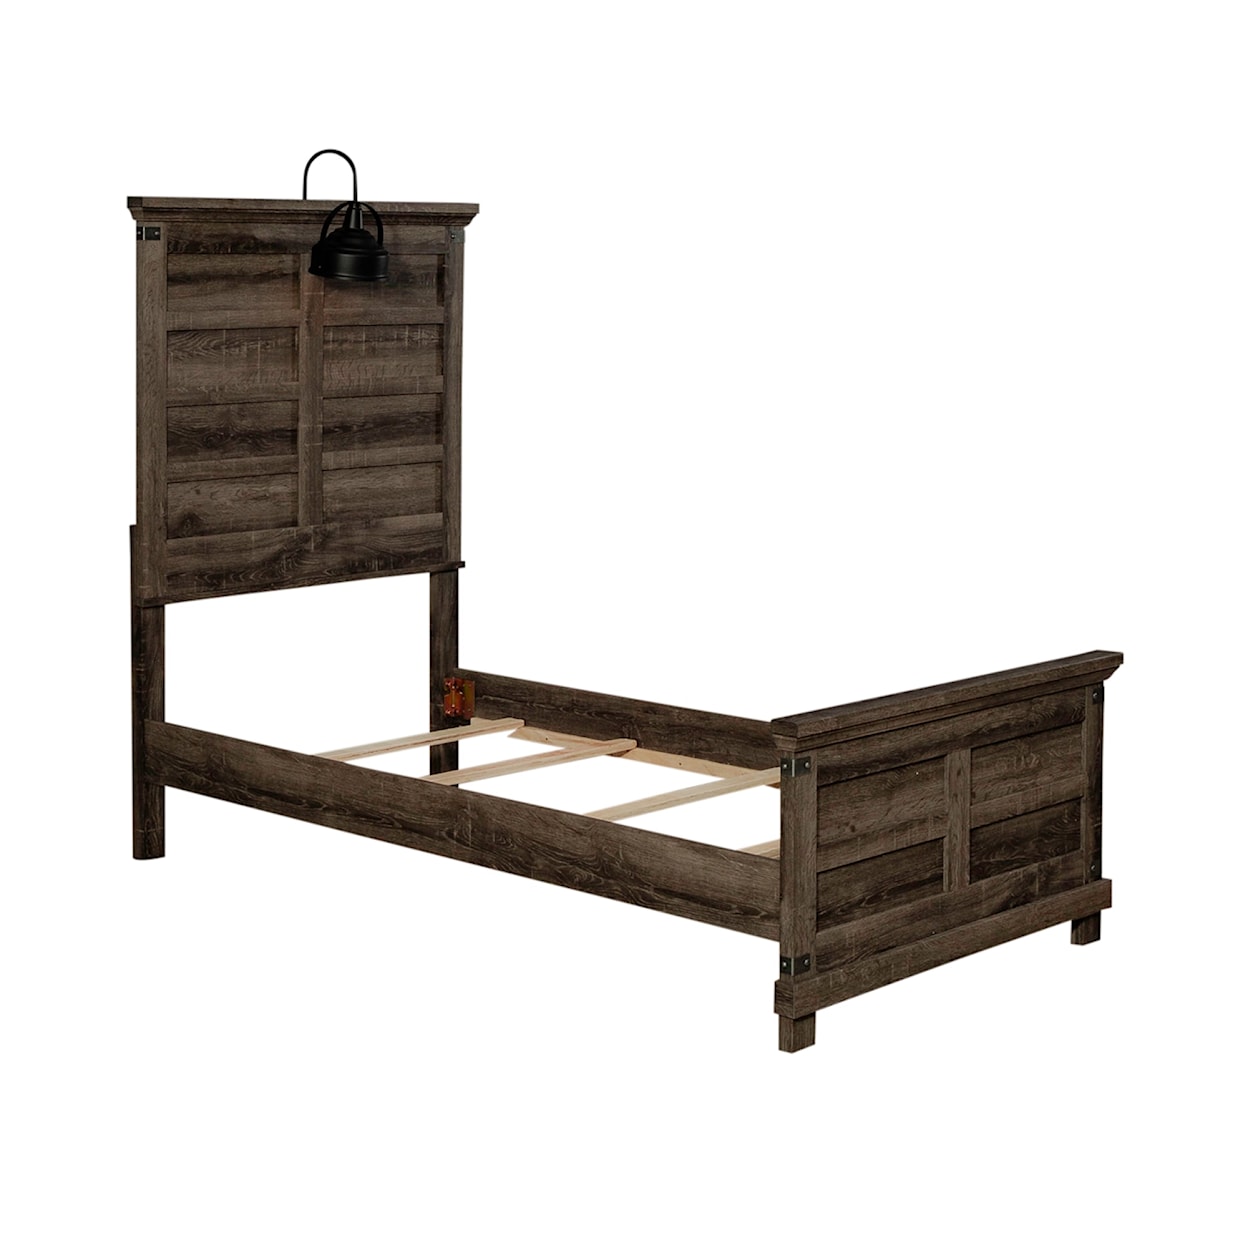 Libby Lakeside Haven Twin Panel Bed